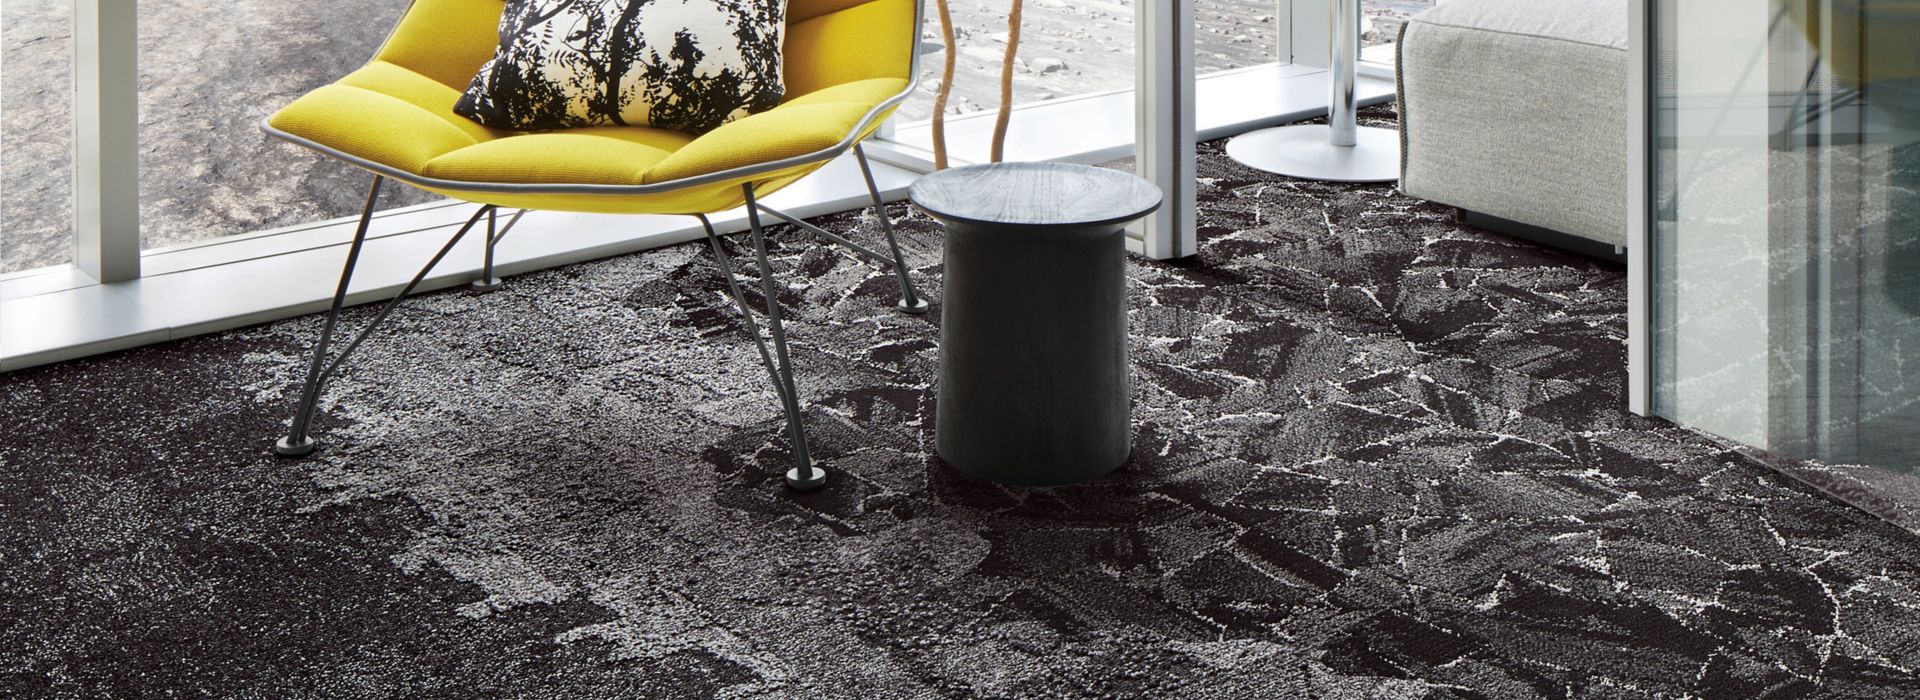 Interface Bridge Creek, Flat Rock, Mountain Rock and Mile Rock carpet tiles in seating area with yellow chair imagen número 2